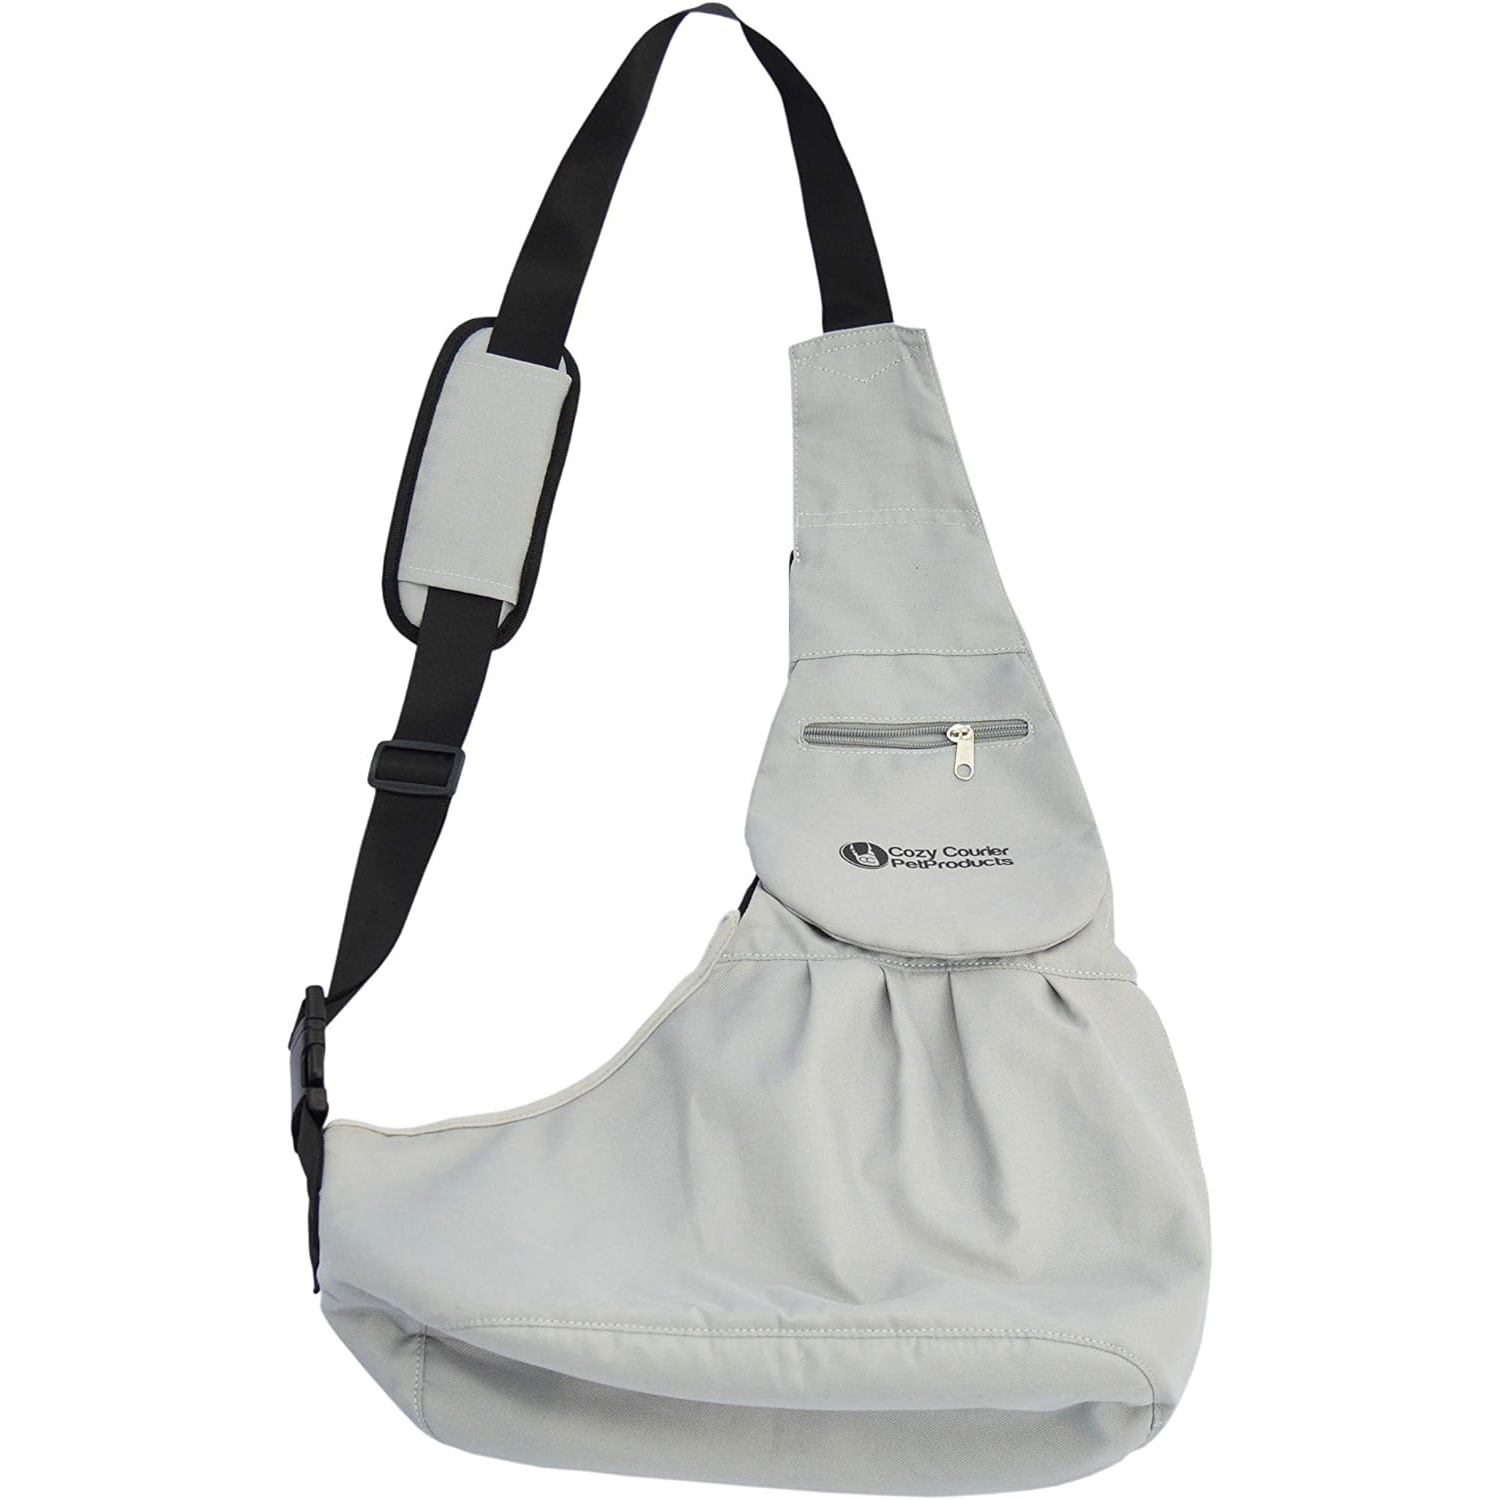 Cozy Courier Pet Products Grey Pet Sling Carrier for Small Dogs 